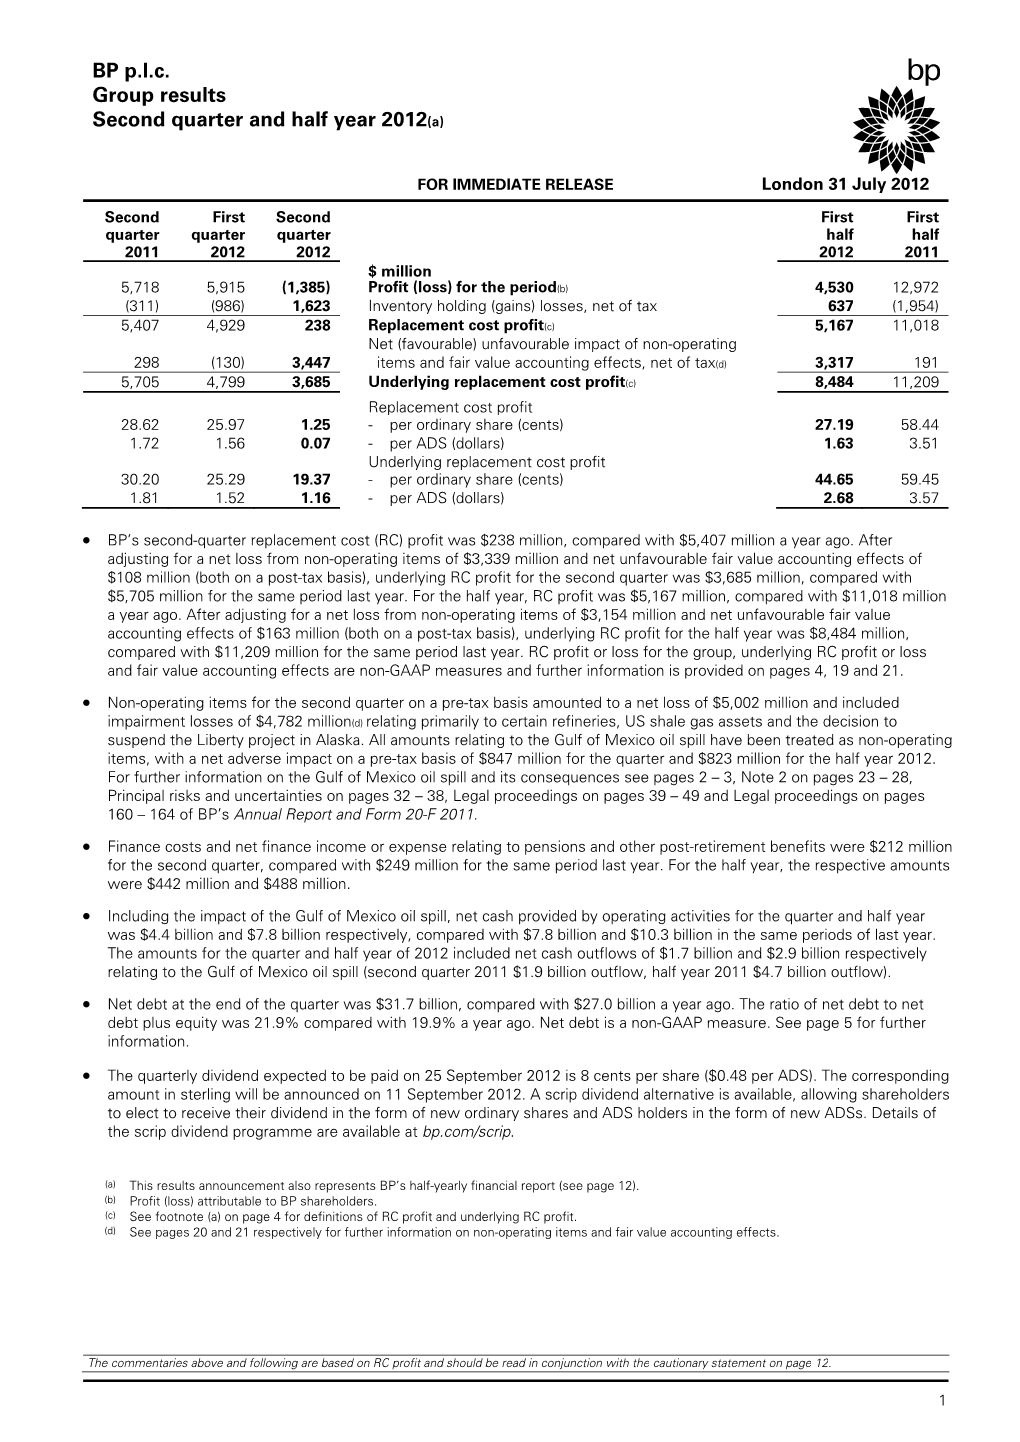 BP P.L.C. Group Results Second Quarter and Half Year 2012(A)